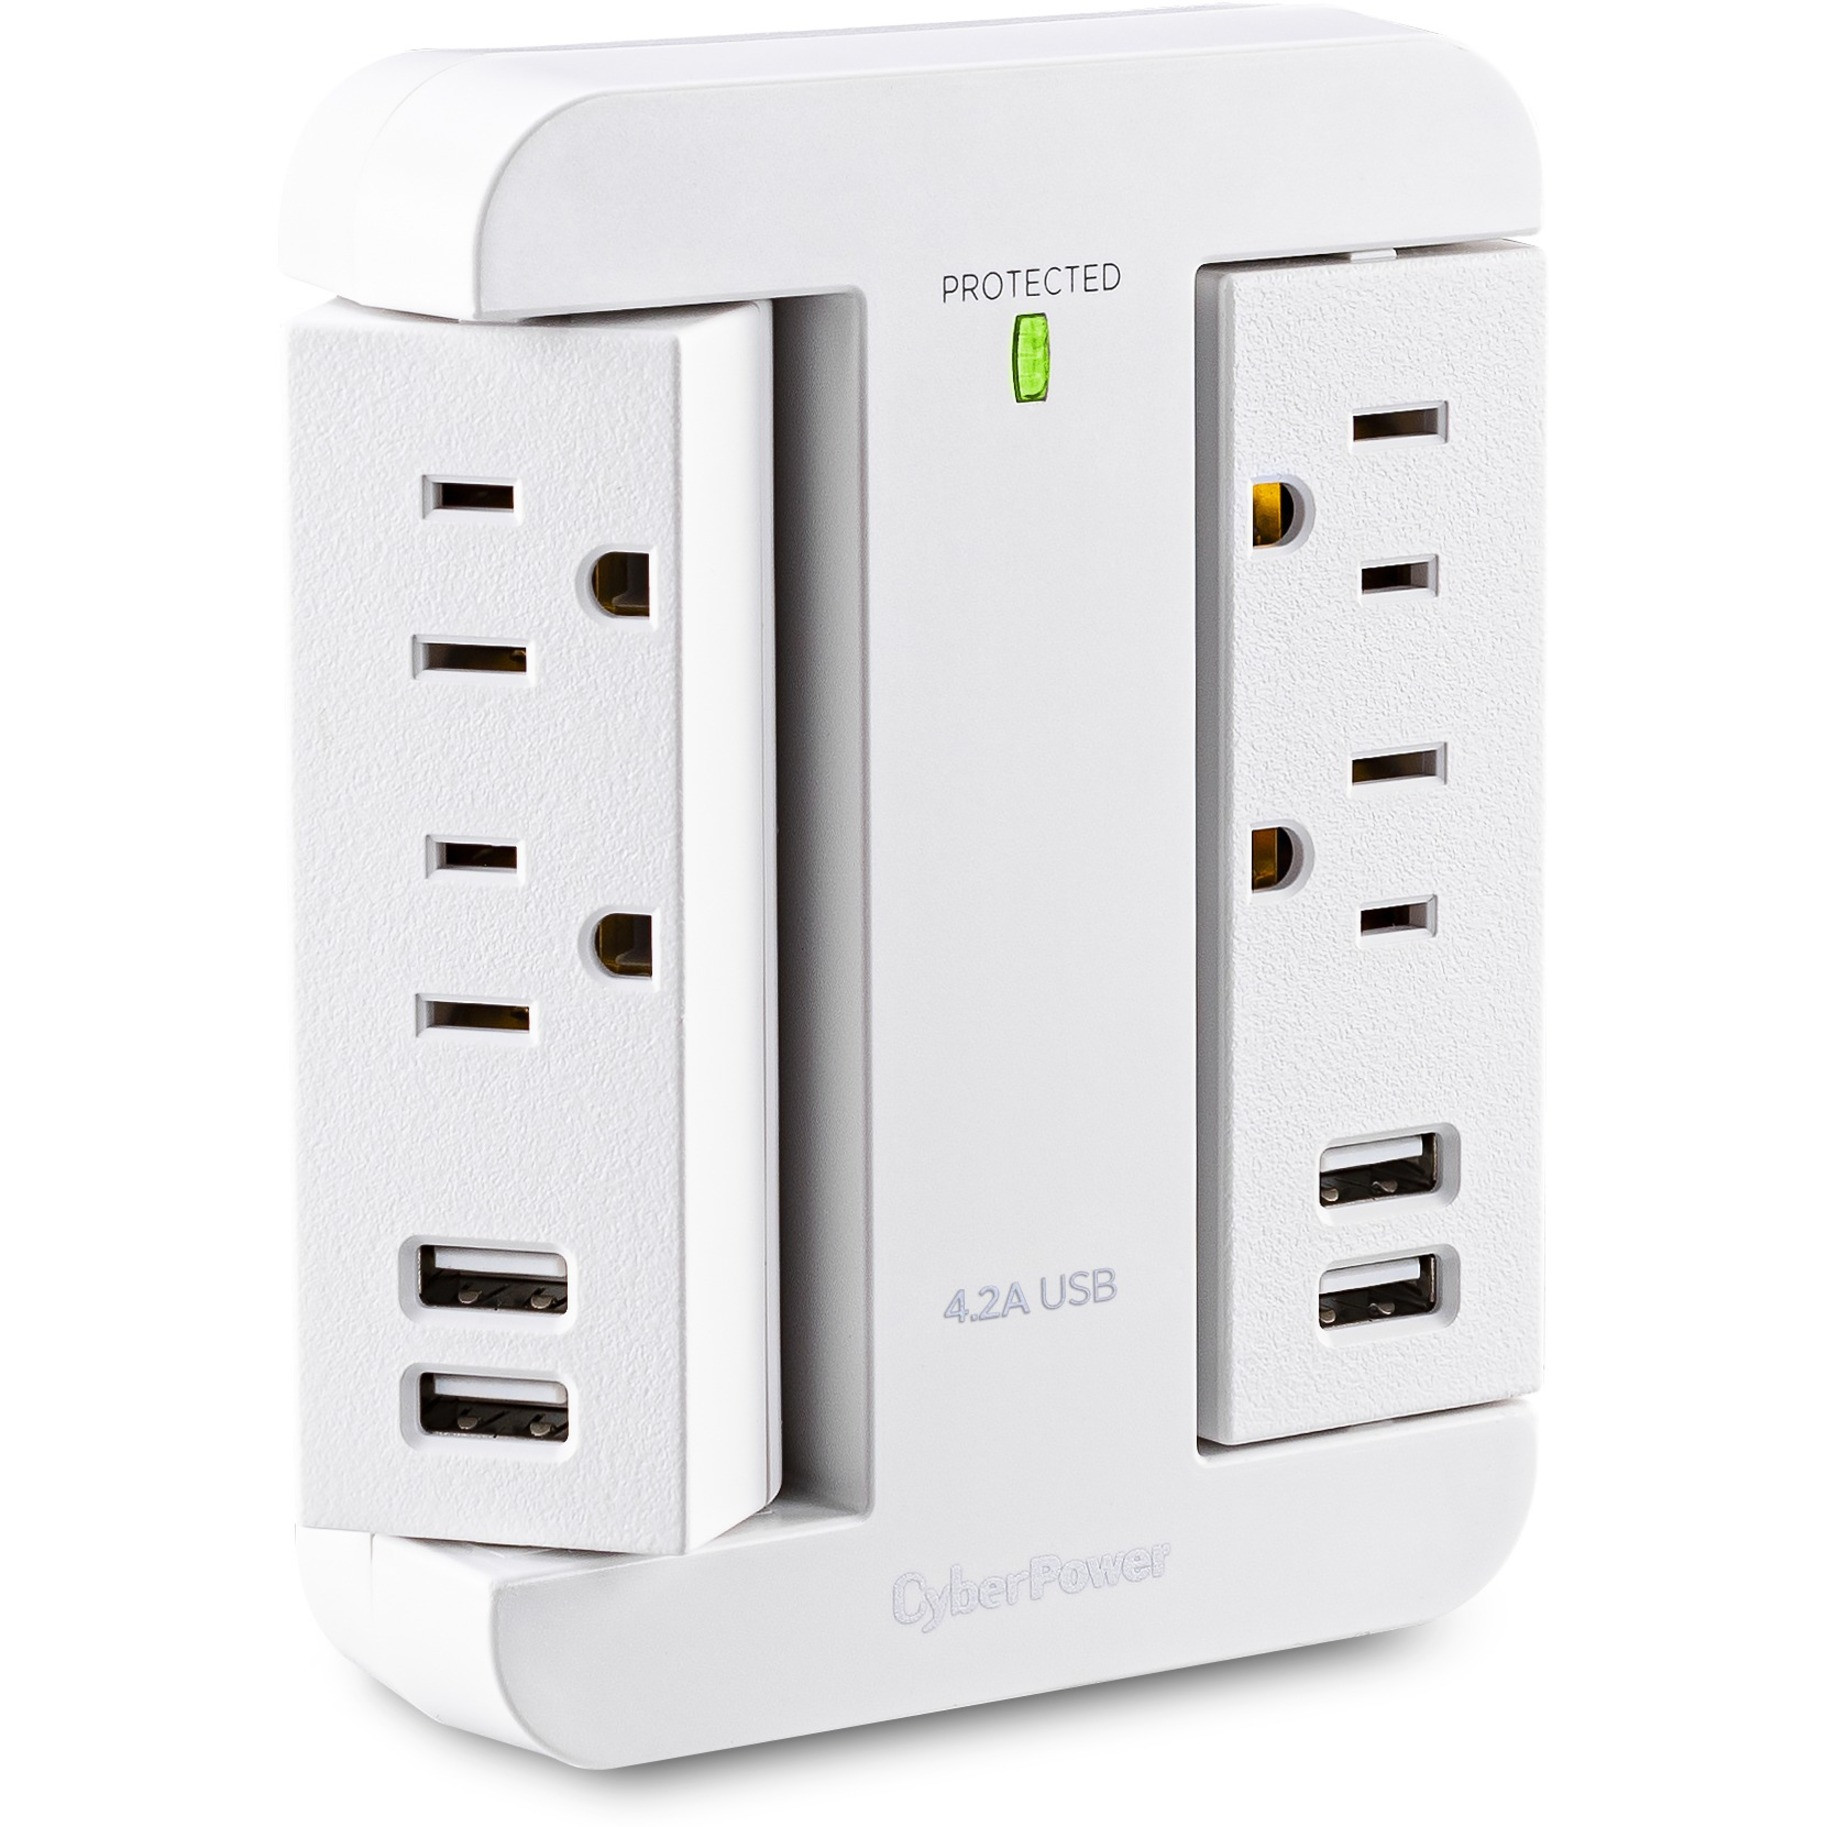 Cyber Power P4WSU Home Office 4Outlet Surge with 900 JNEMA 5-15P, Wall Tap, 44.2 Amps (Shared) USB, EMI/RFI Filtration, White, Lifetime Wa… P4WSU